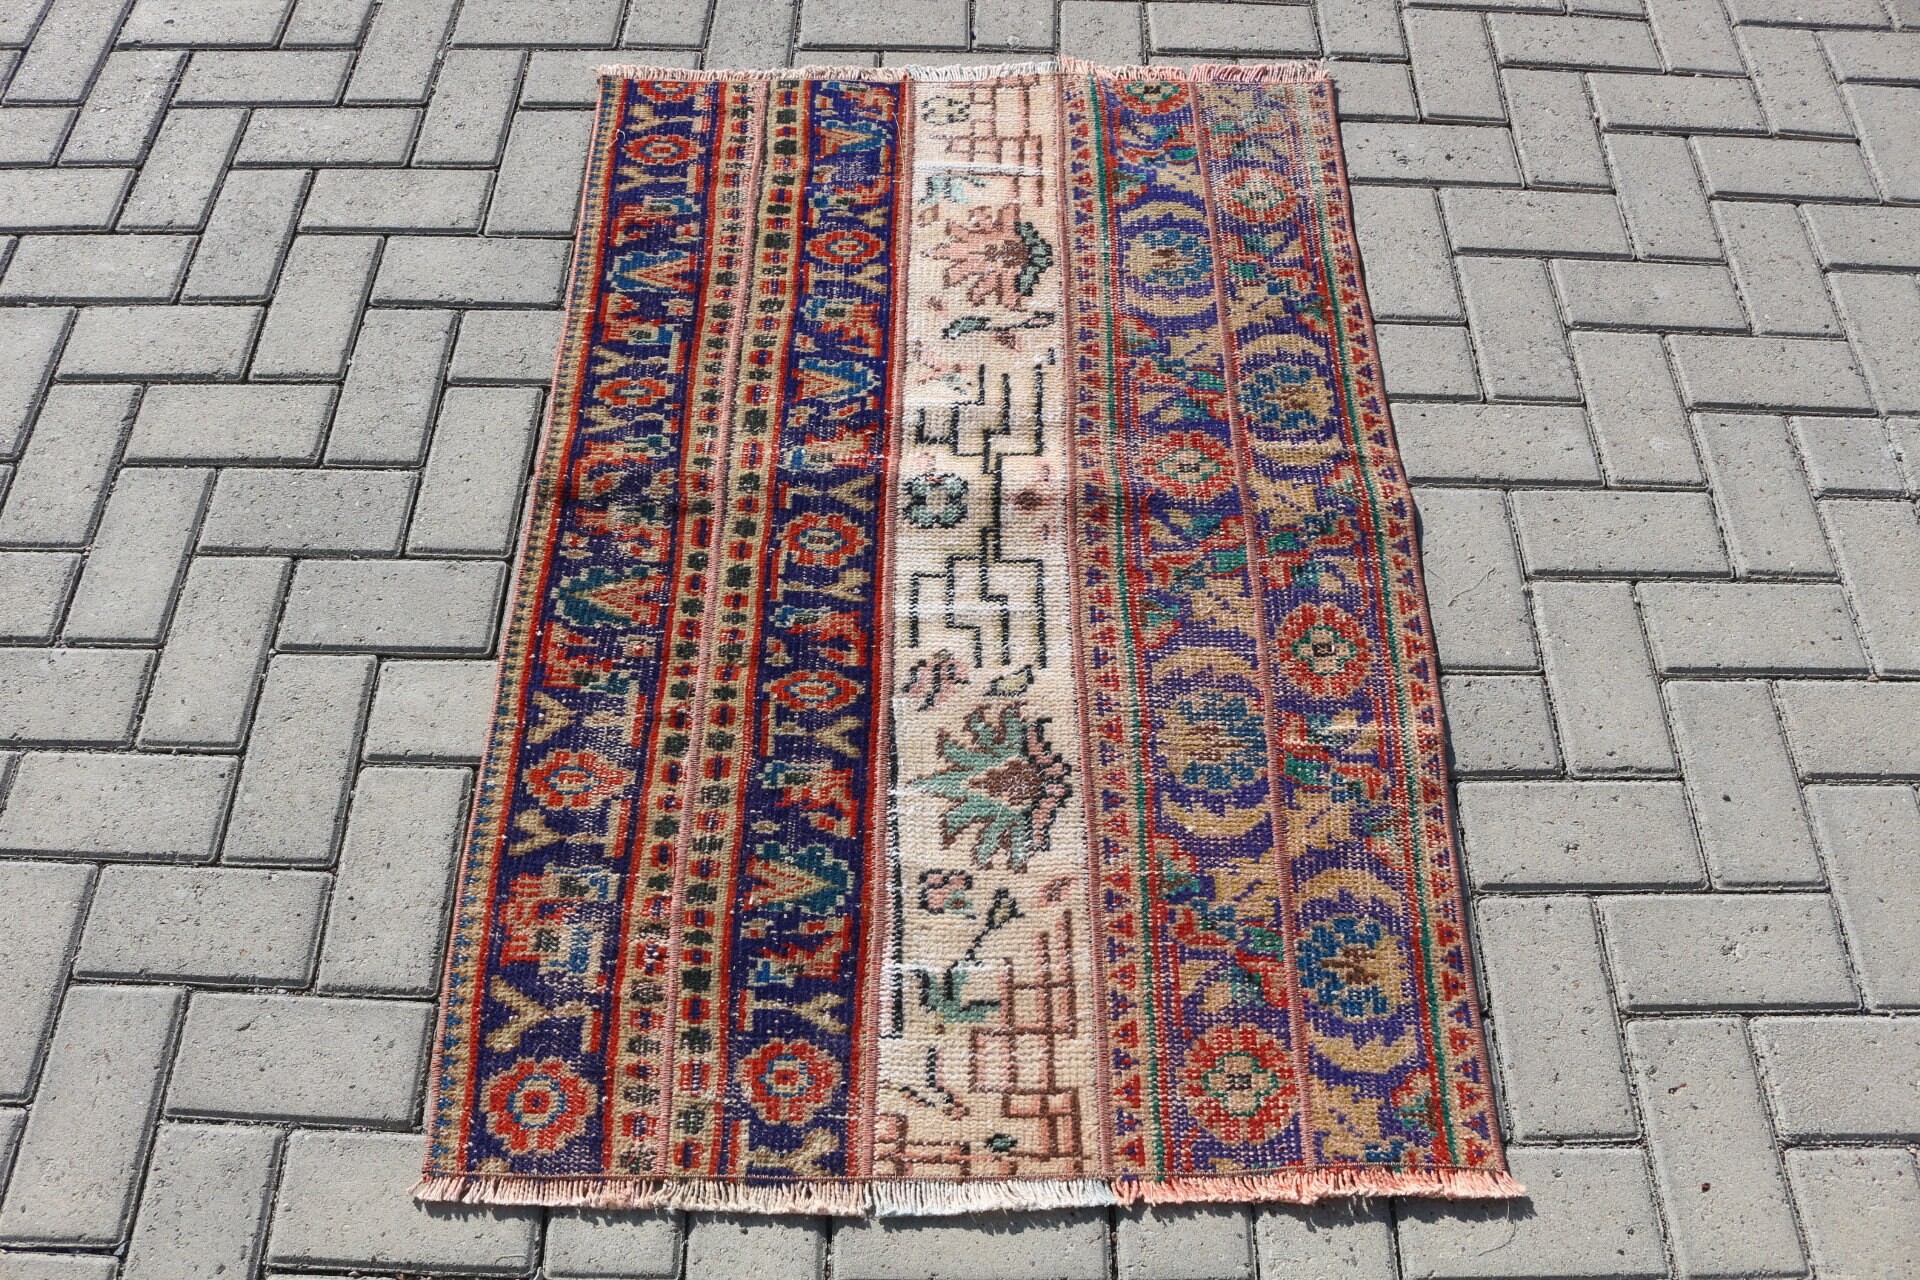 Turkish Rugs, Blue  2.6x3.9 ft Small Rugs, Bathroom Rug, Entry Rug, Kitchen Rug, Vintage Rugs, Rugs for Bath, Oushak Rugs